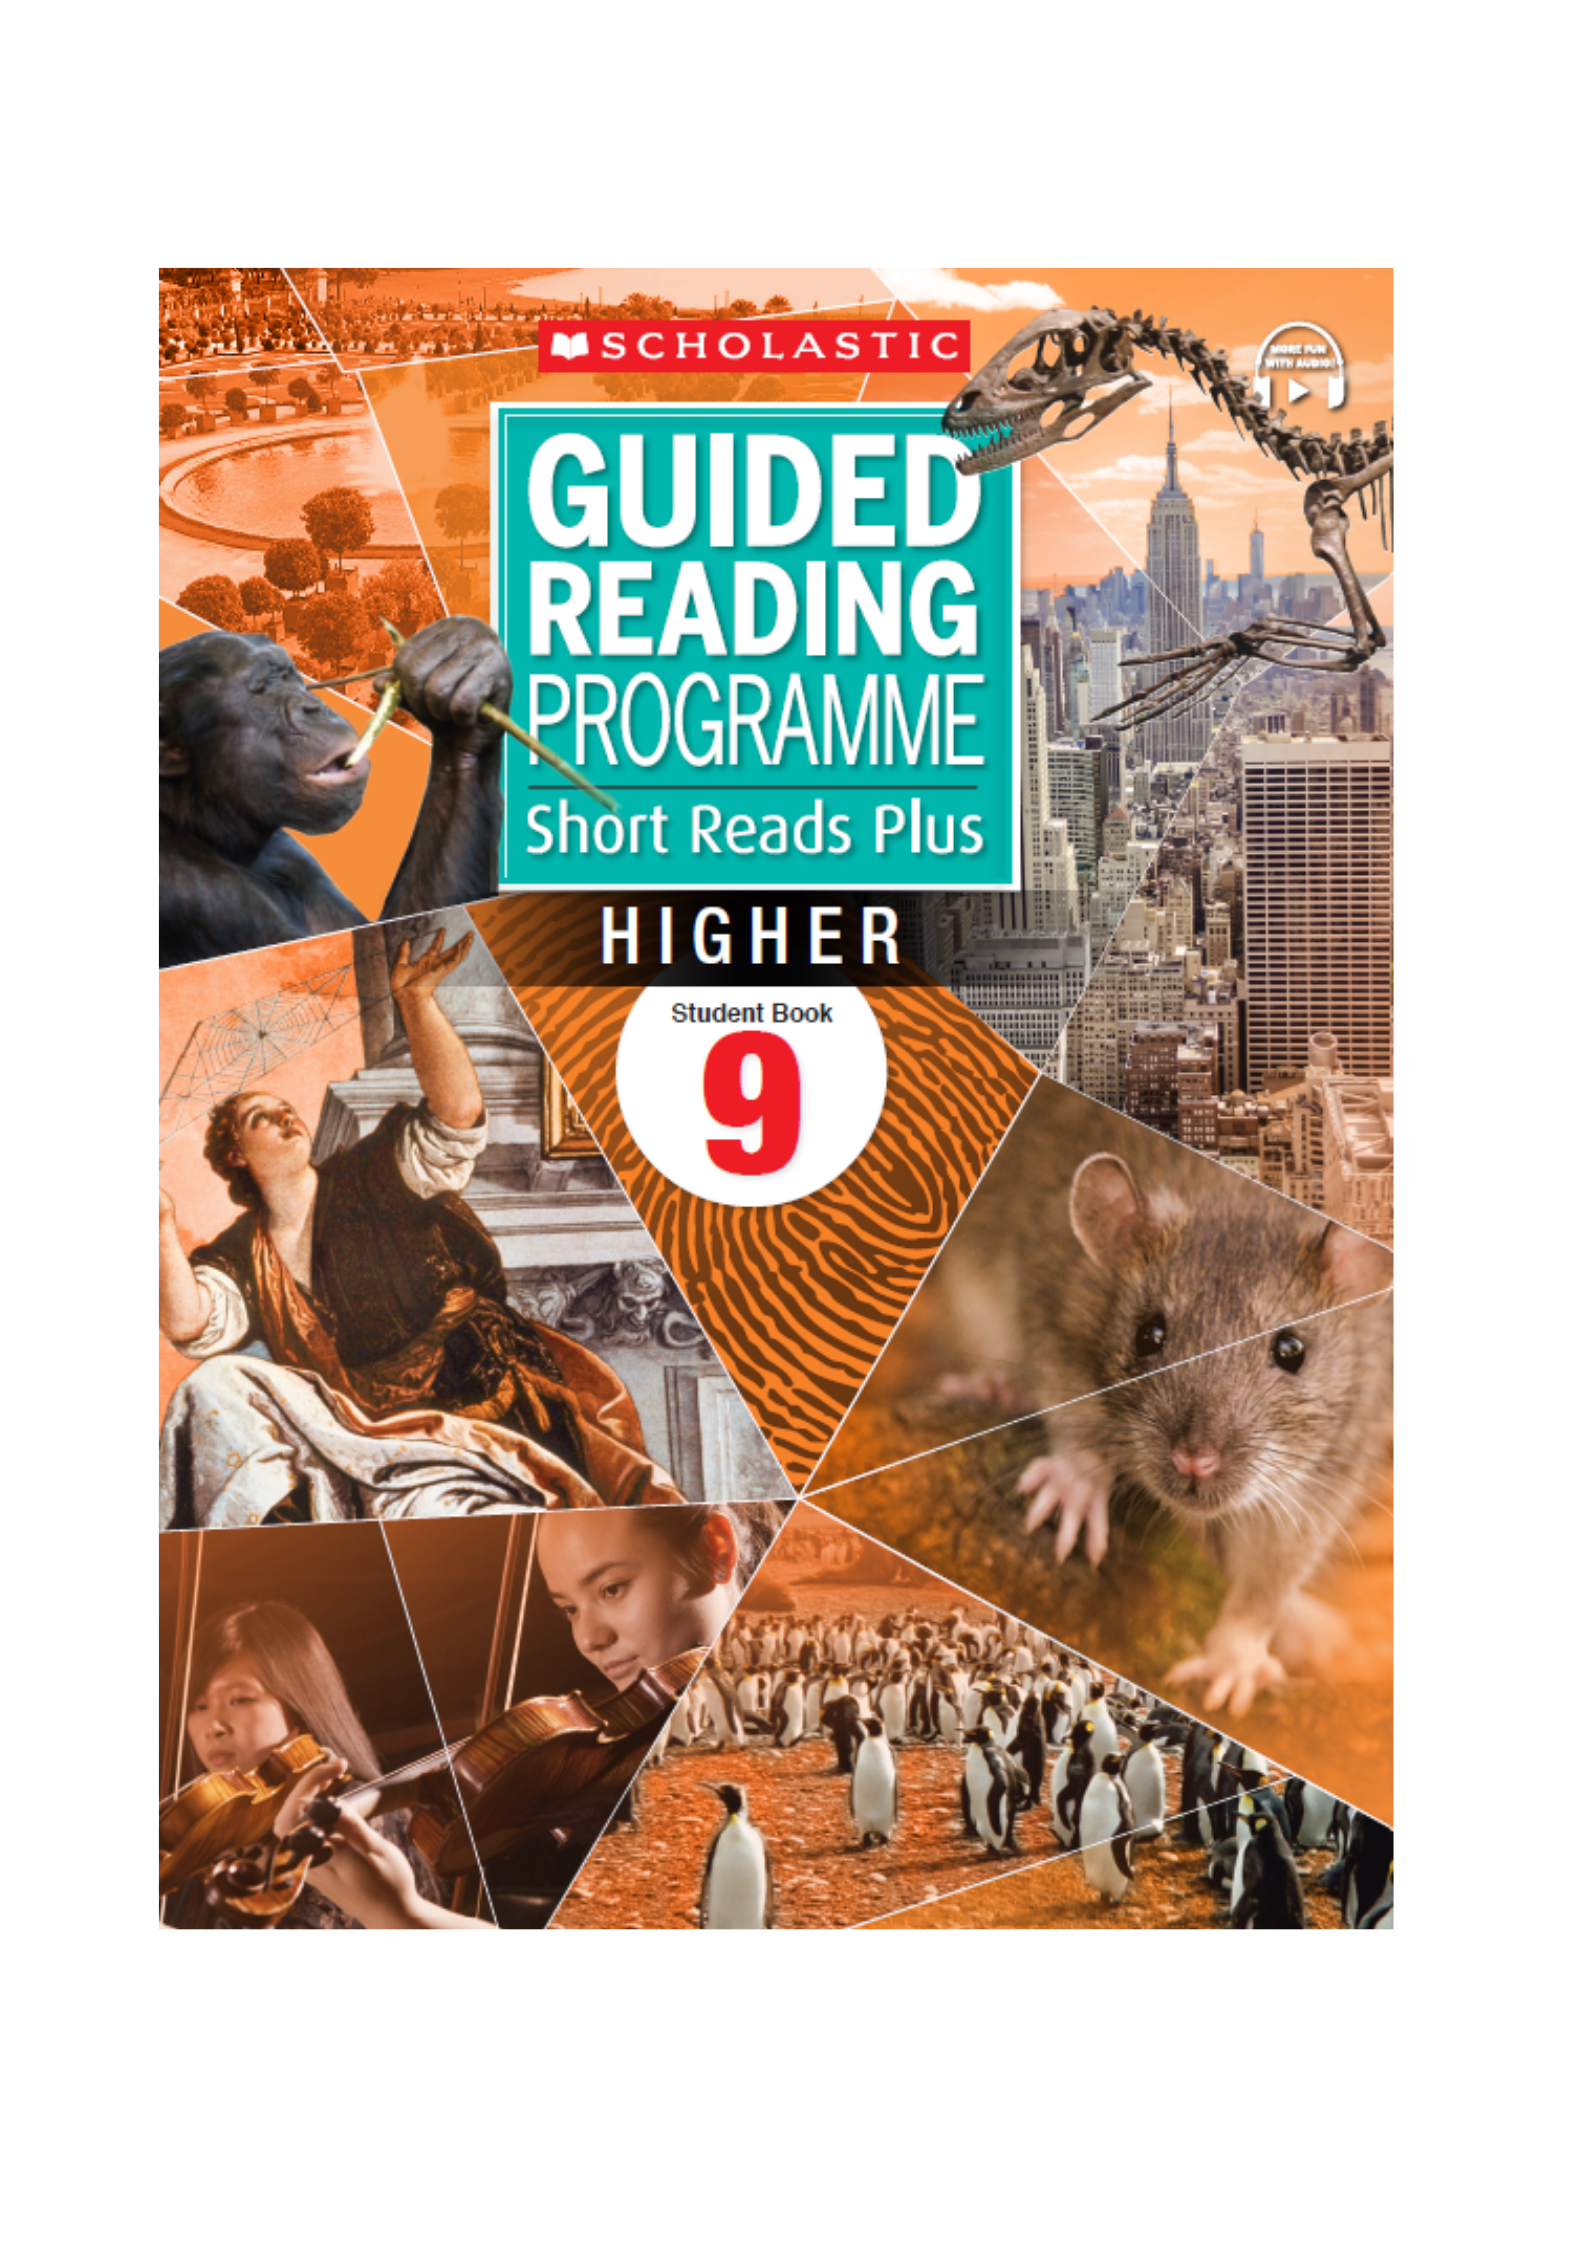 Guided Reading Short Reads Plus Higher Student Book – Level 9 (Asia)